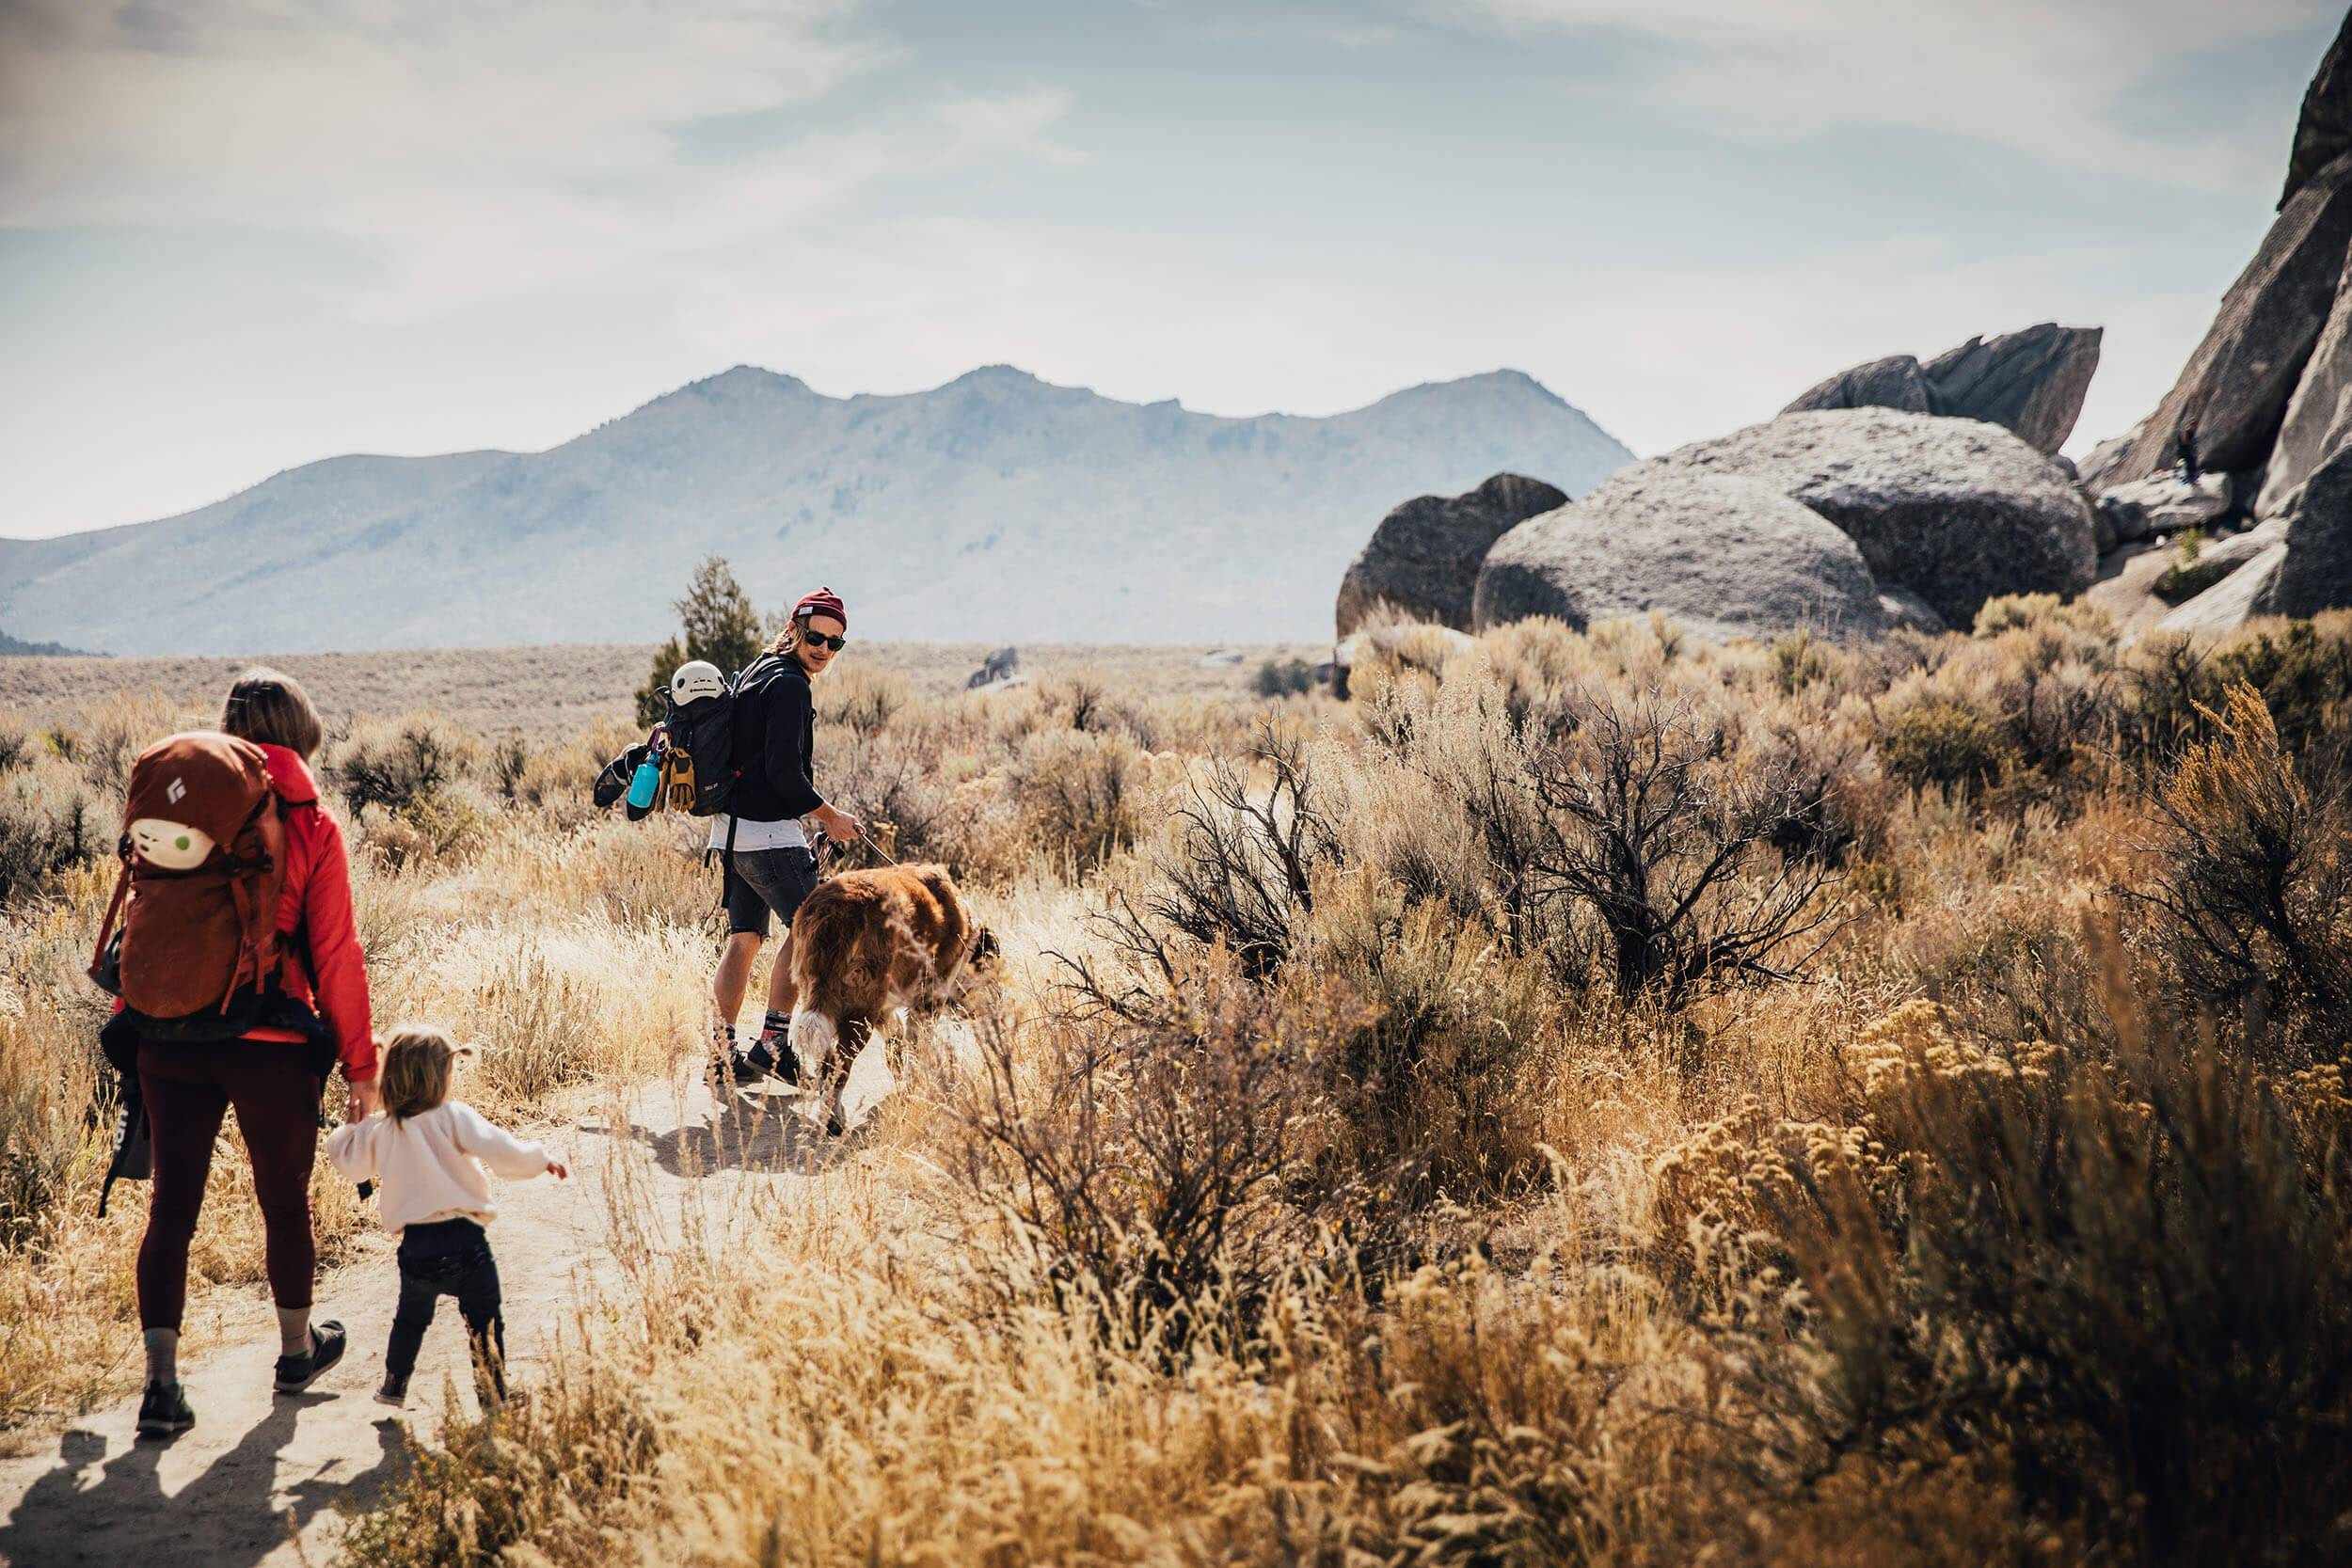 a family of three with their dog walking along a trail surrounded by desert shrubs with rock formations in the background